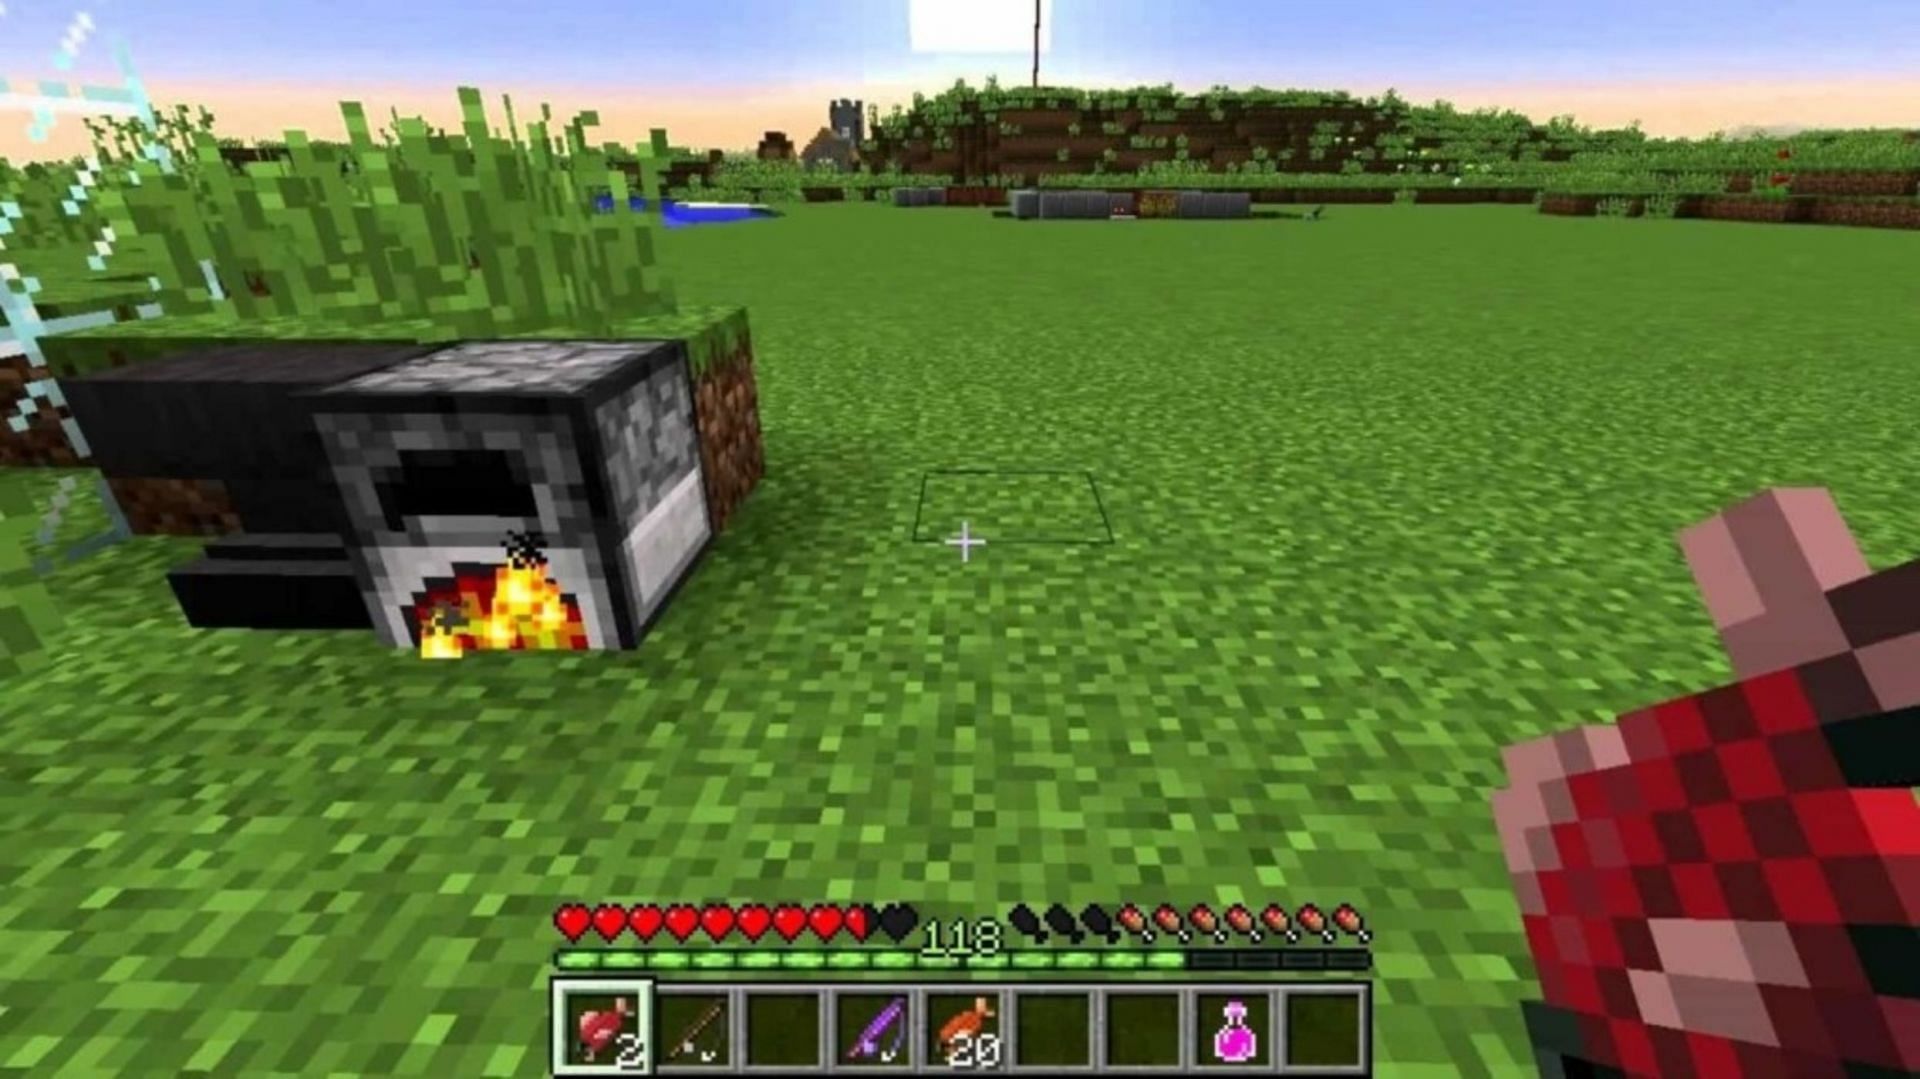 A player cooks salmon in a nearby furnace (Image via Mojang)